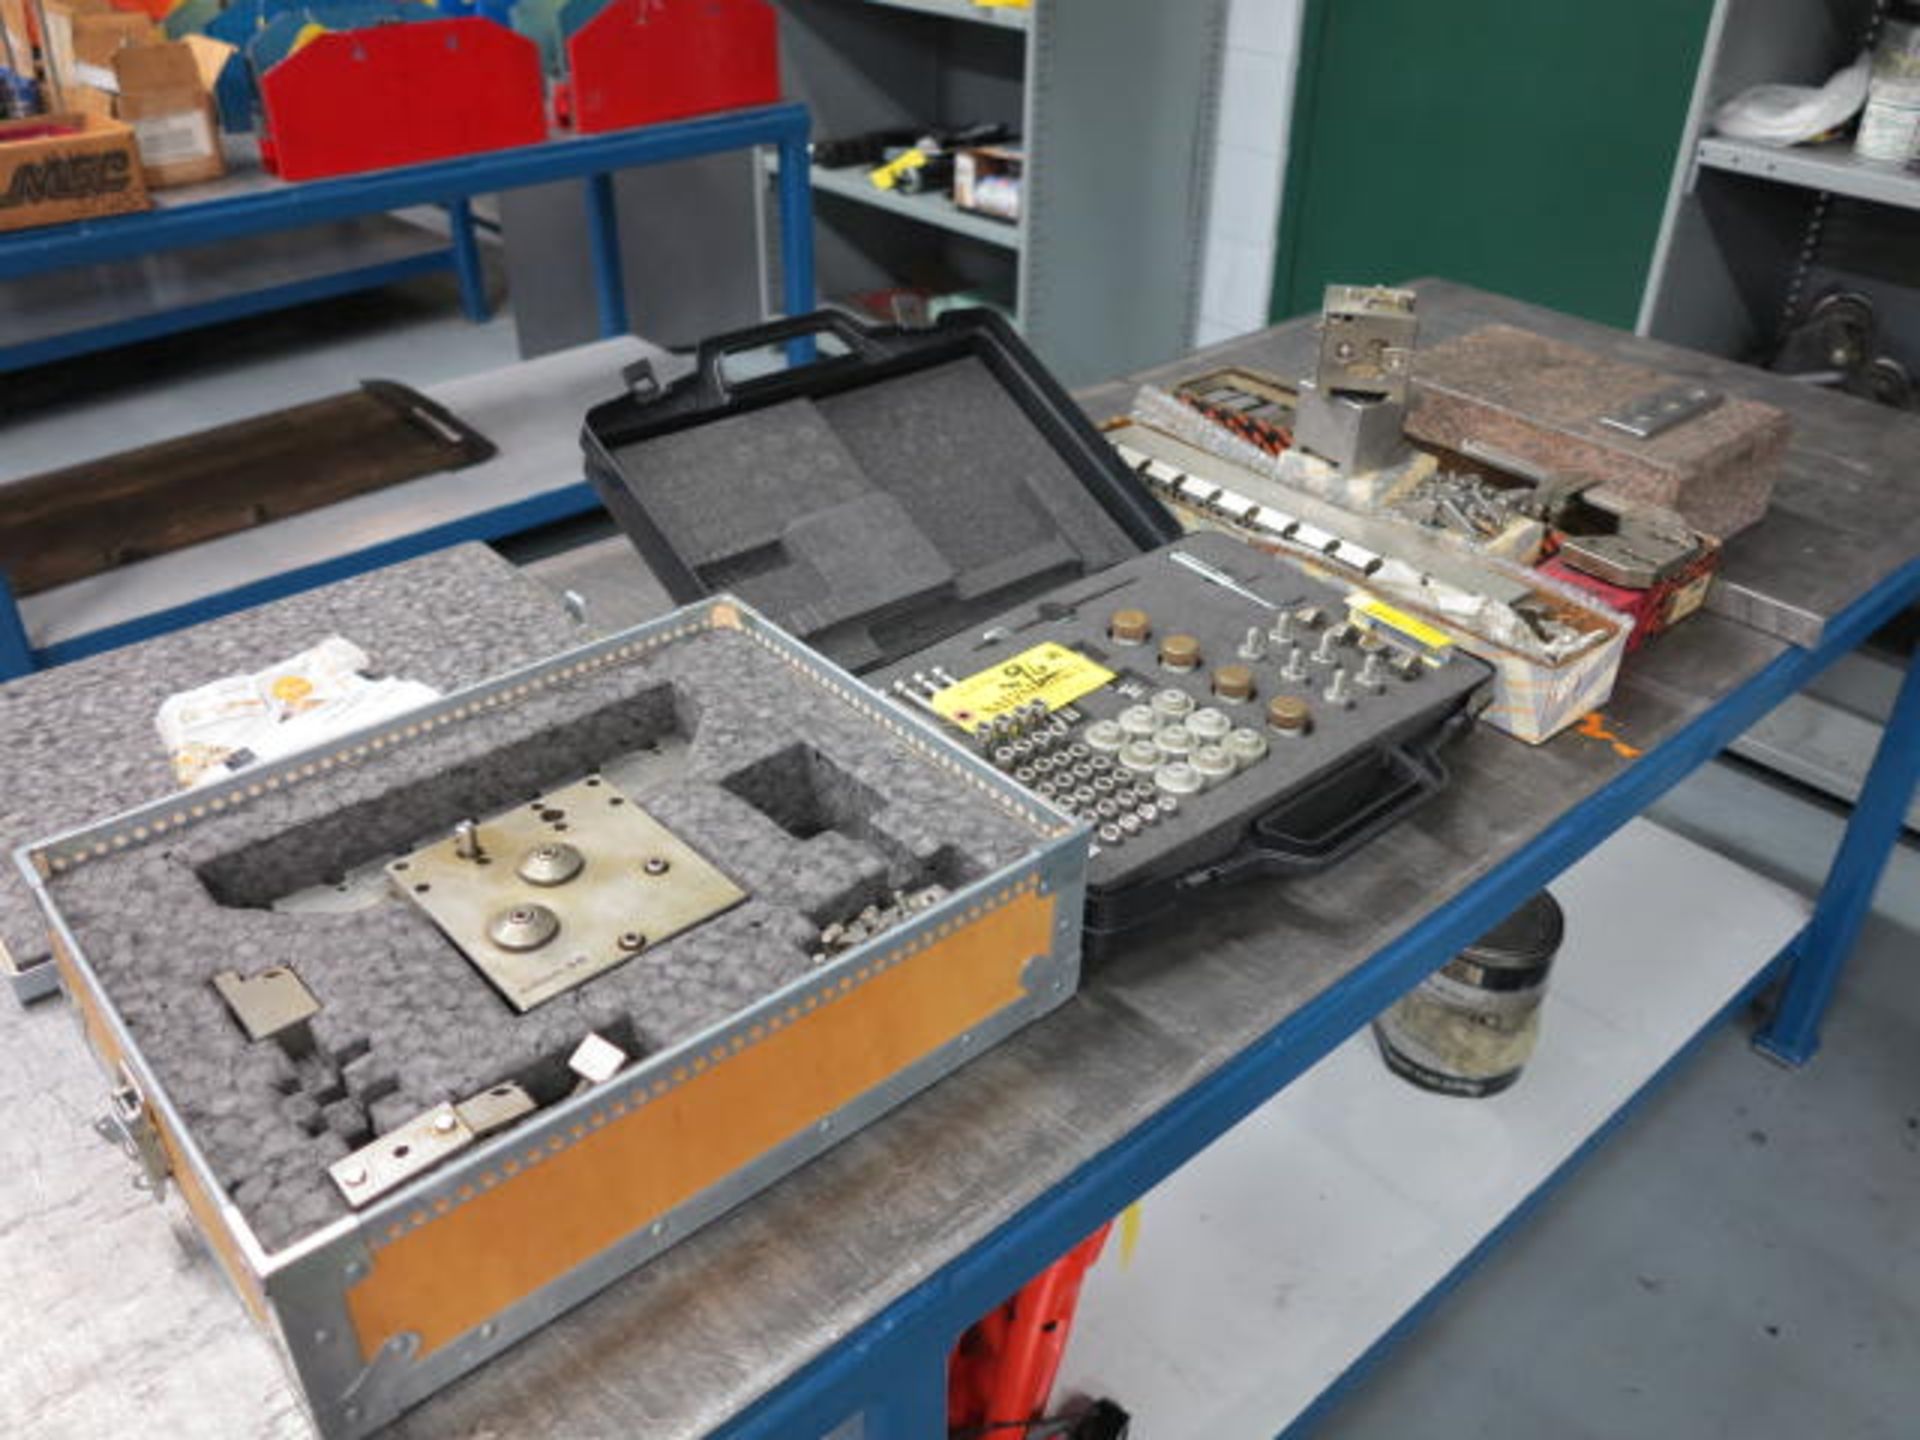 Lot 3R Tooling for Wire EDM with Presesetting Station, Rails, Fixtures and Tool Carriers